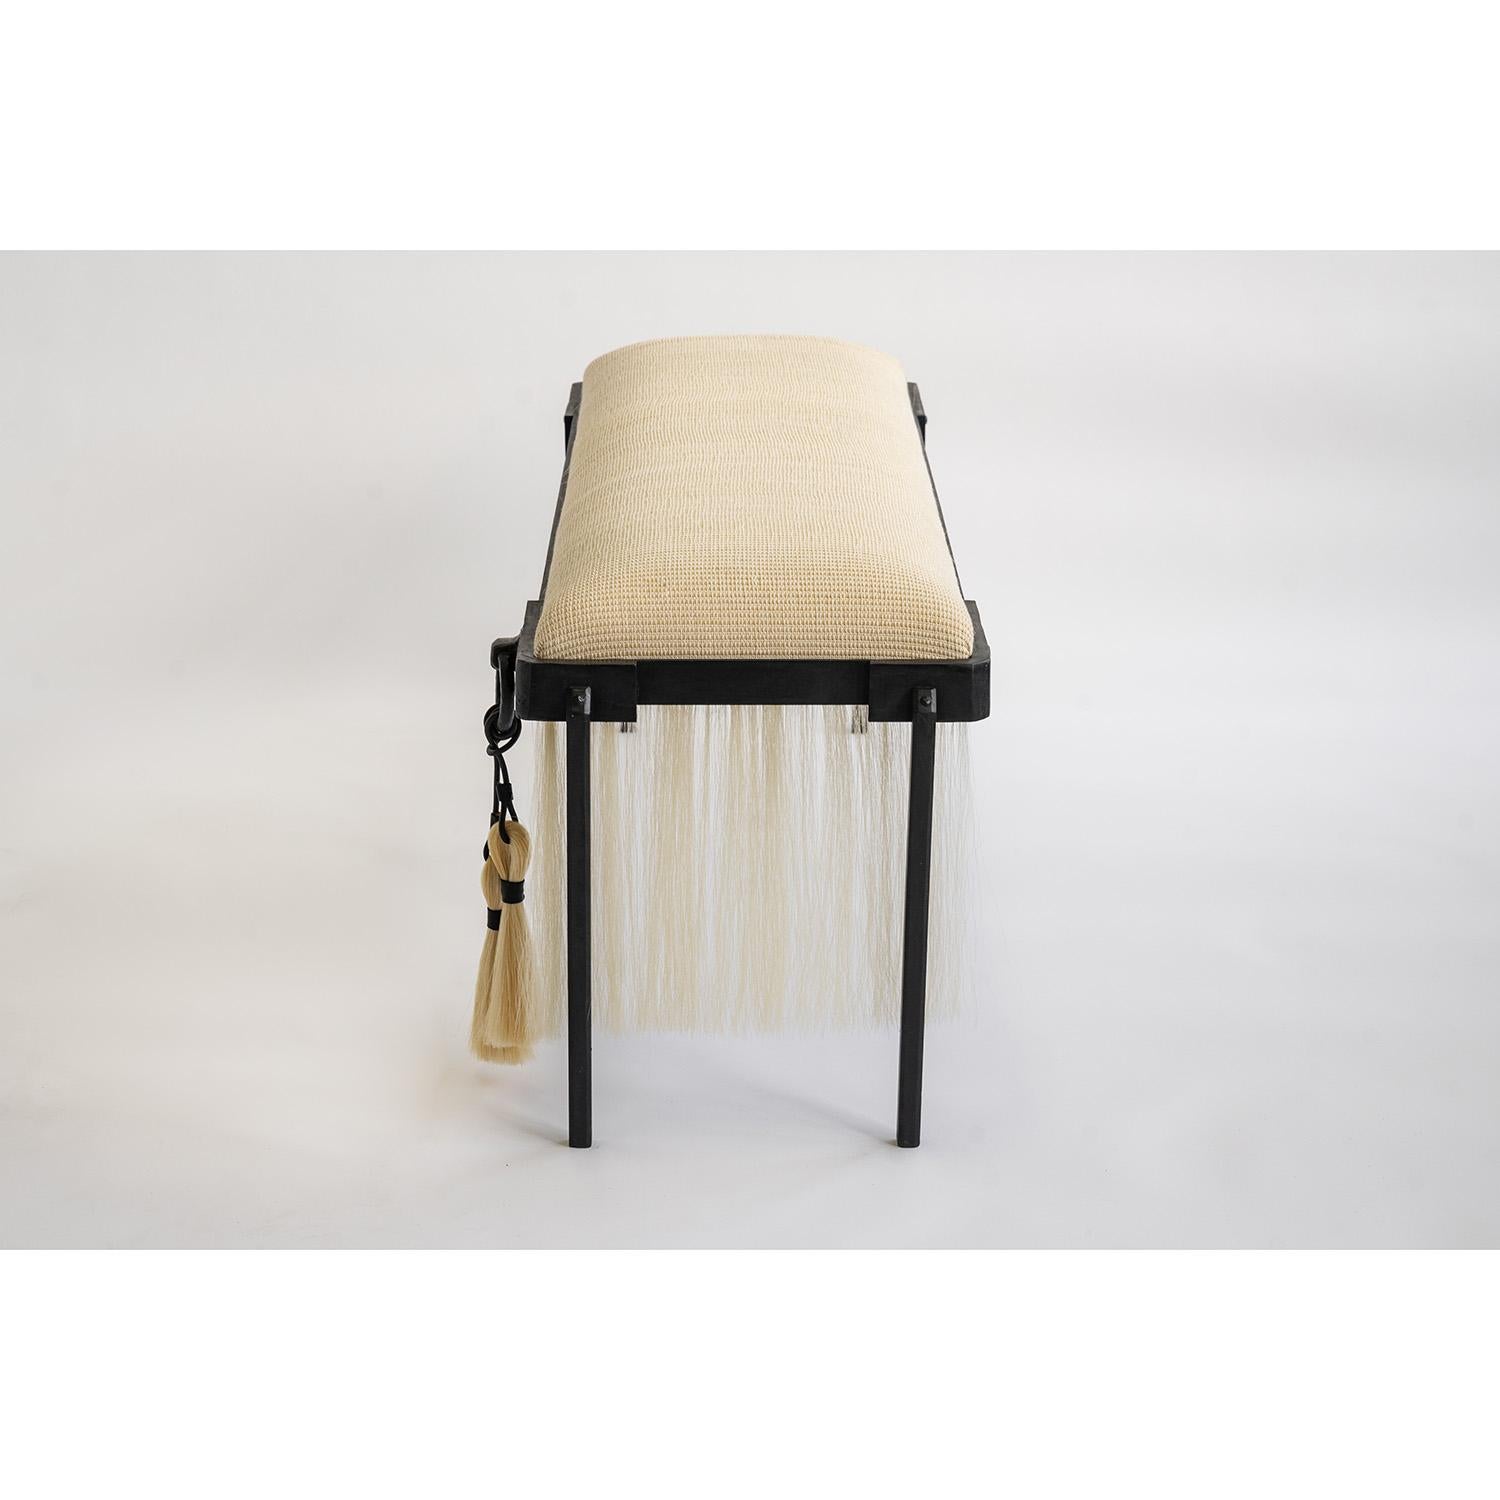 HORSE HAIR BENCH NO. 1
JM. Szymanski 
d. 2019

Contemporary furniture at its finest. Horsehair textile and blackened iron are combined to create an exciting juxtaposition of elements. Available in creme, brown, and black. 

Custom sizes available.